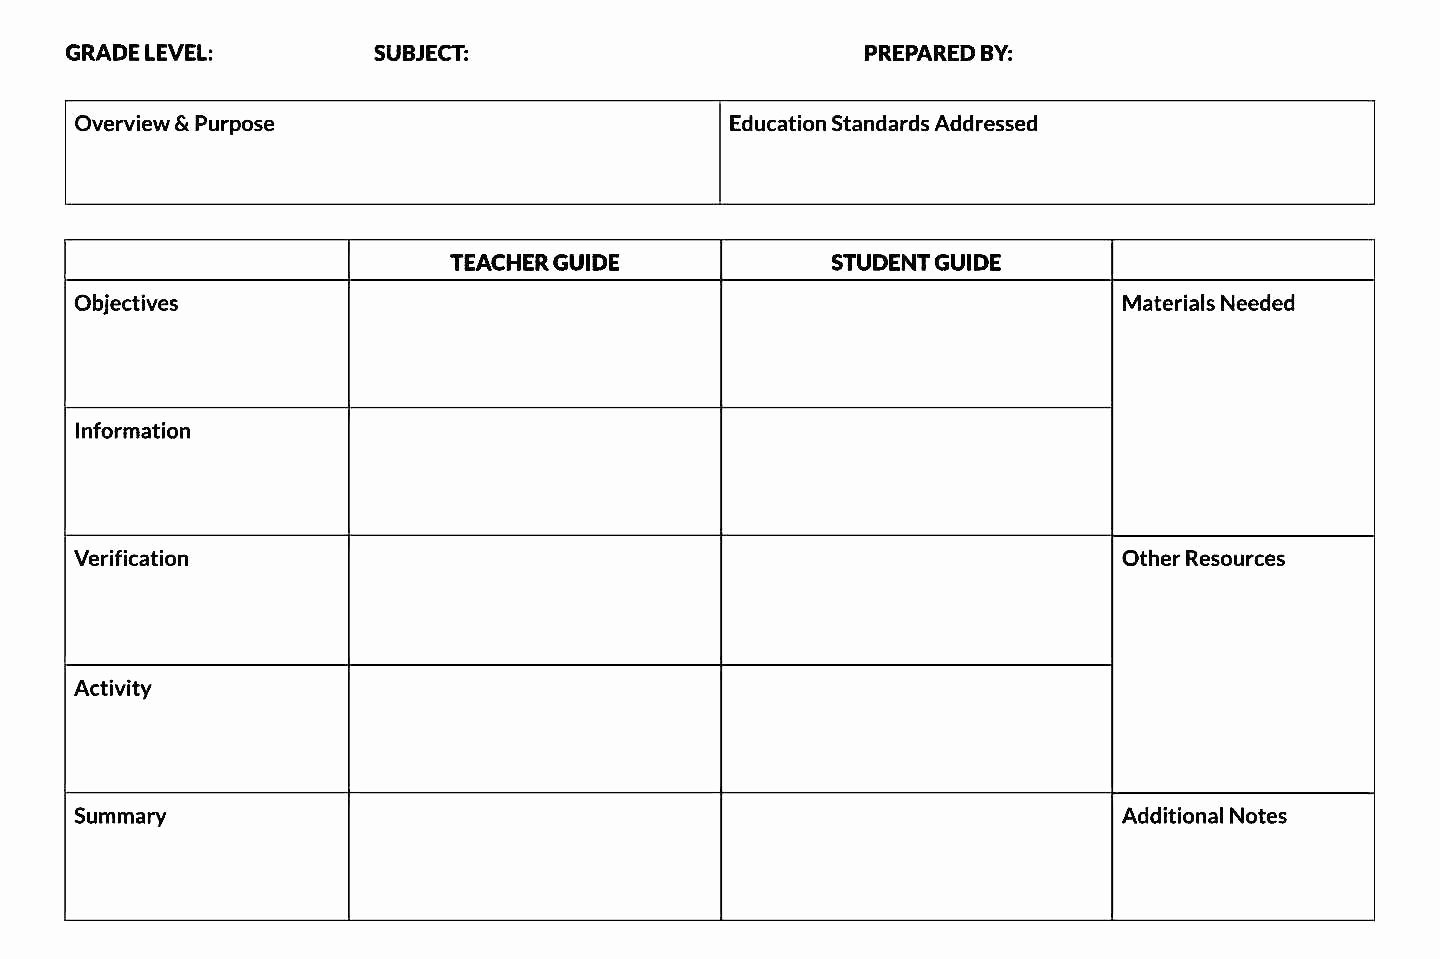 Free Printable Lesson Plan Template Word format Sample